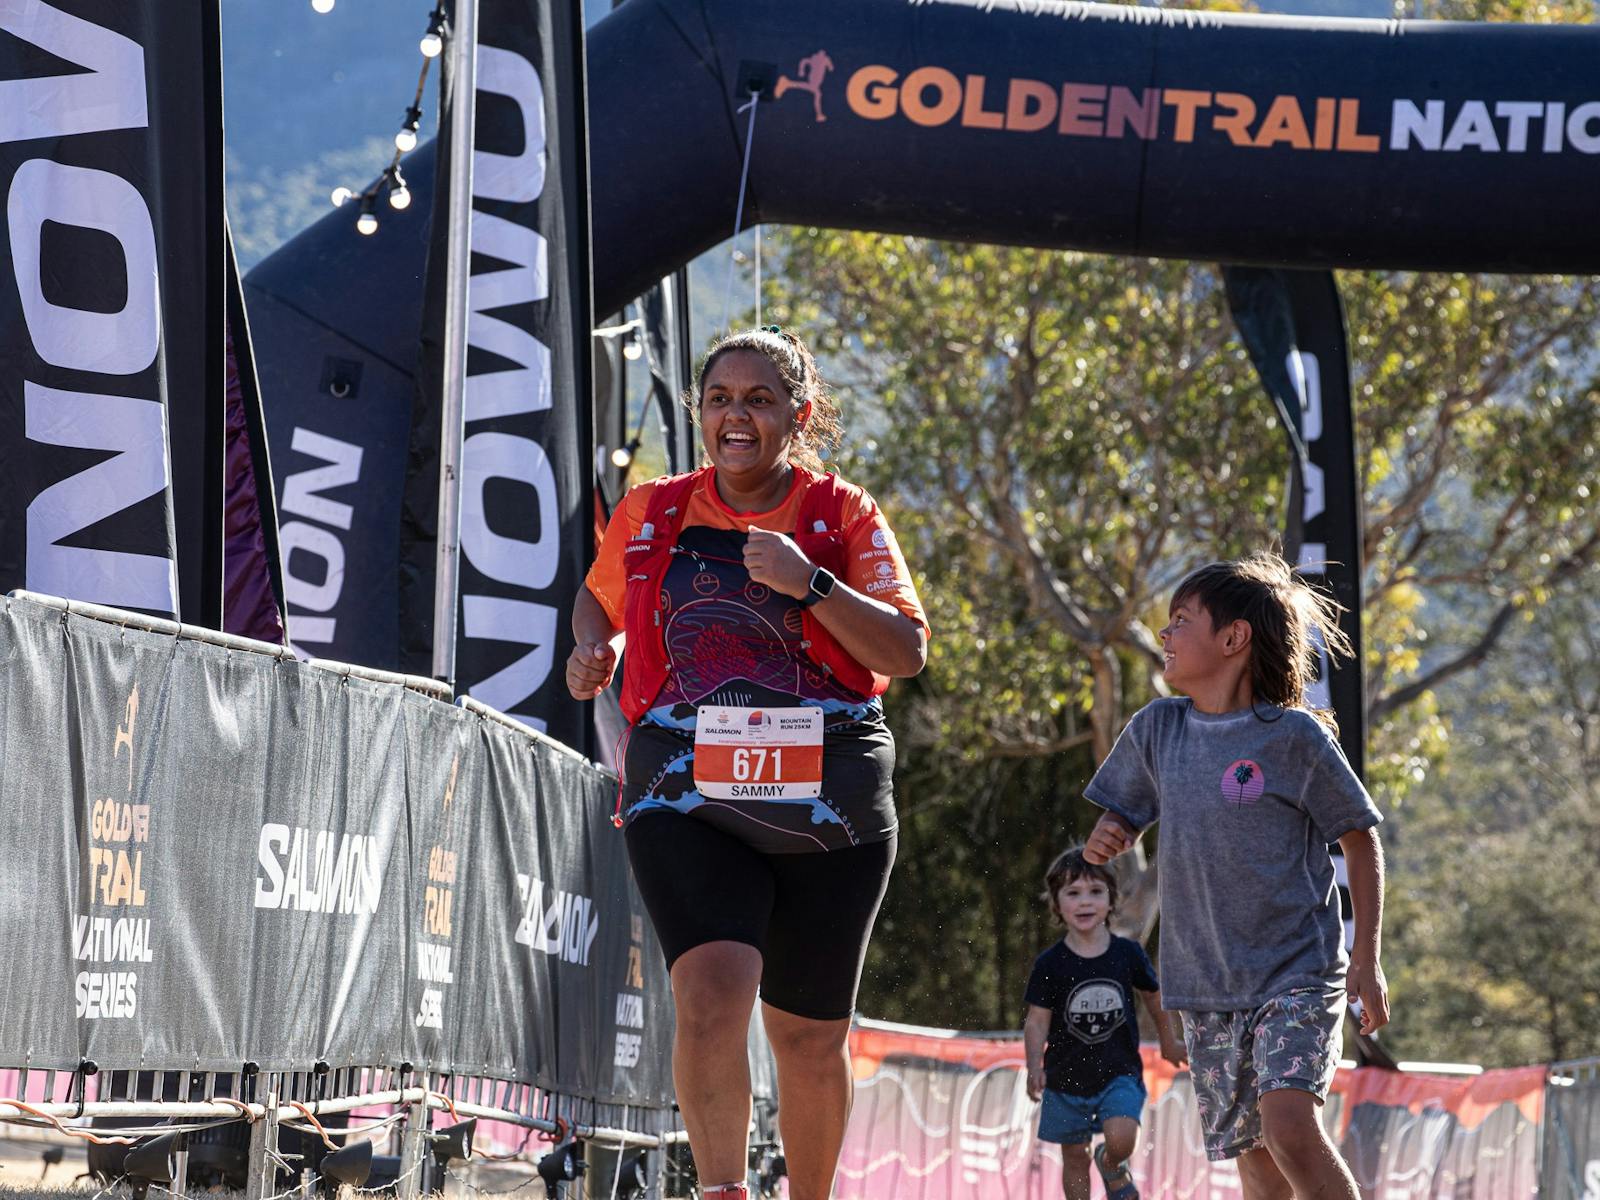 A woman runs through the finish arch with children next to her